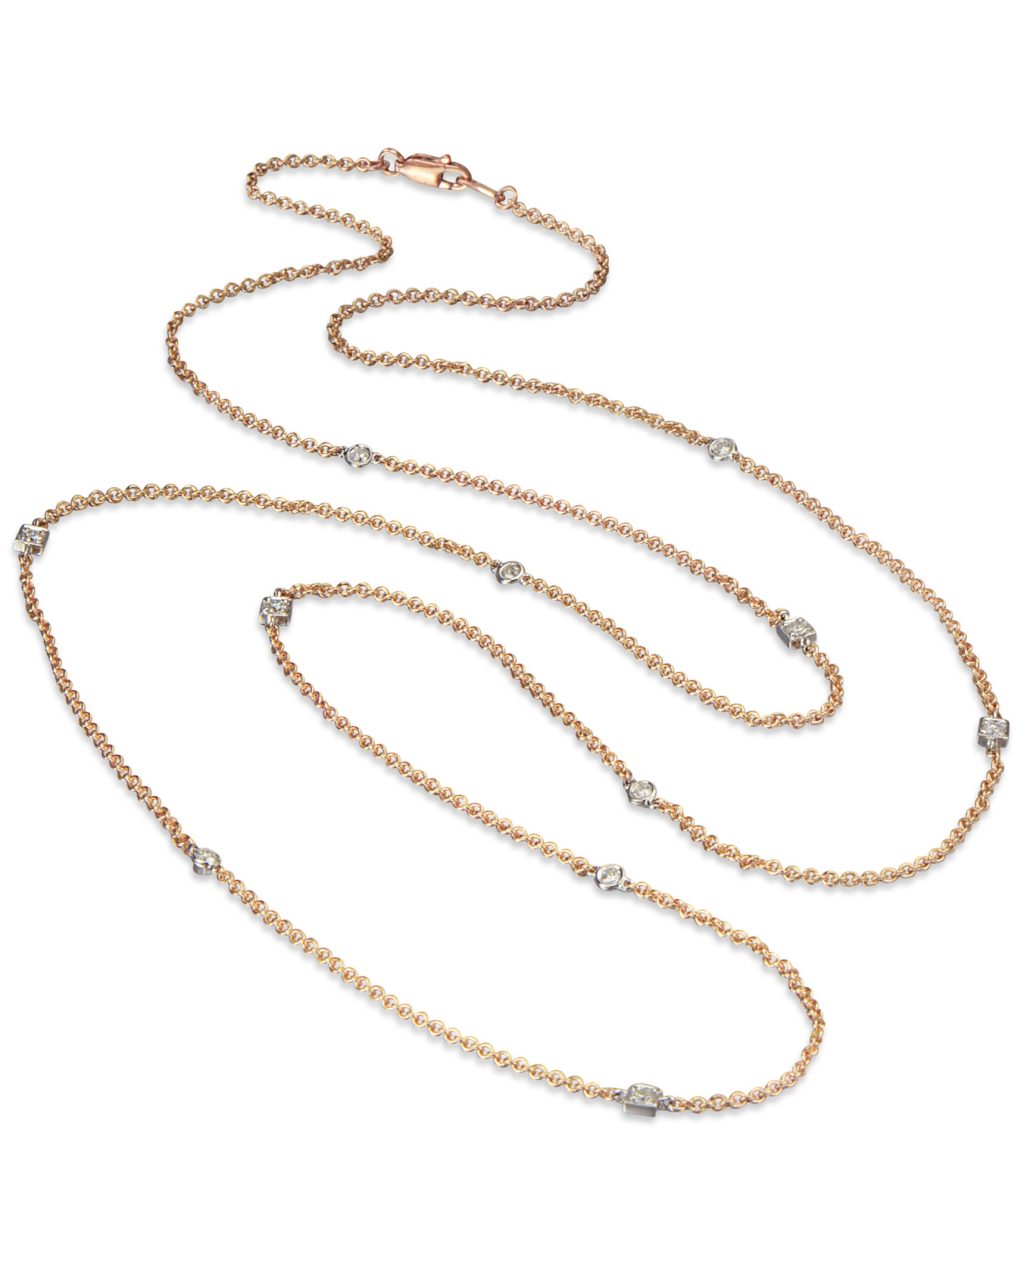 Bezel-Set Diamond and Rose Gold and White Gold Chain Necklace - Turgeon ...